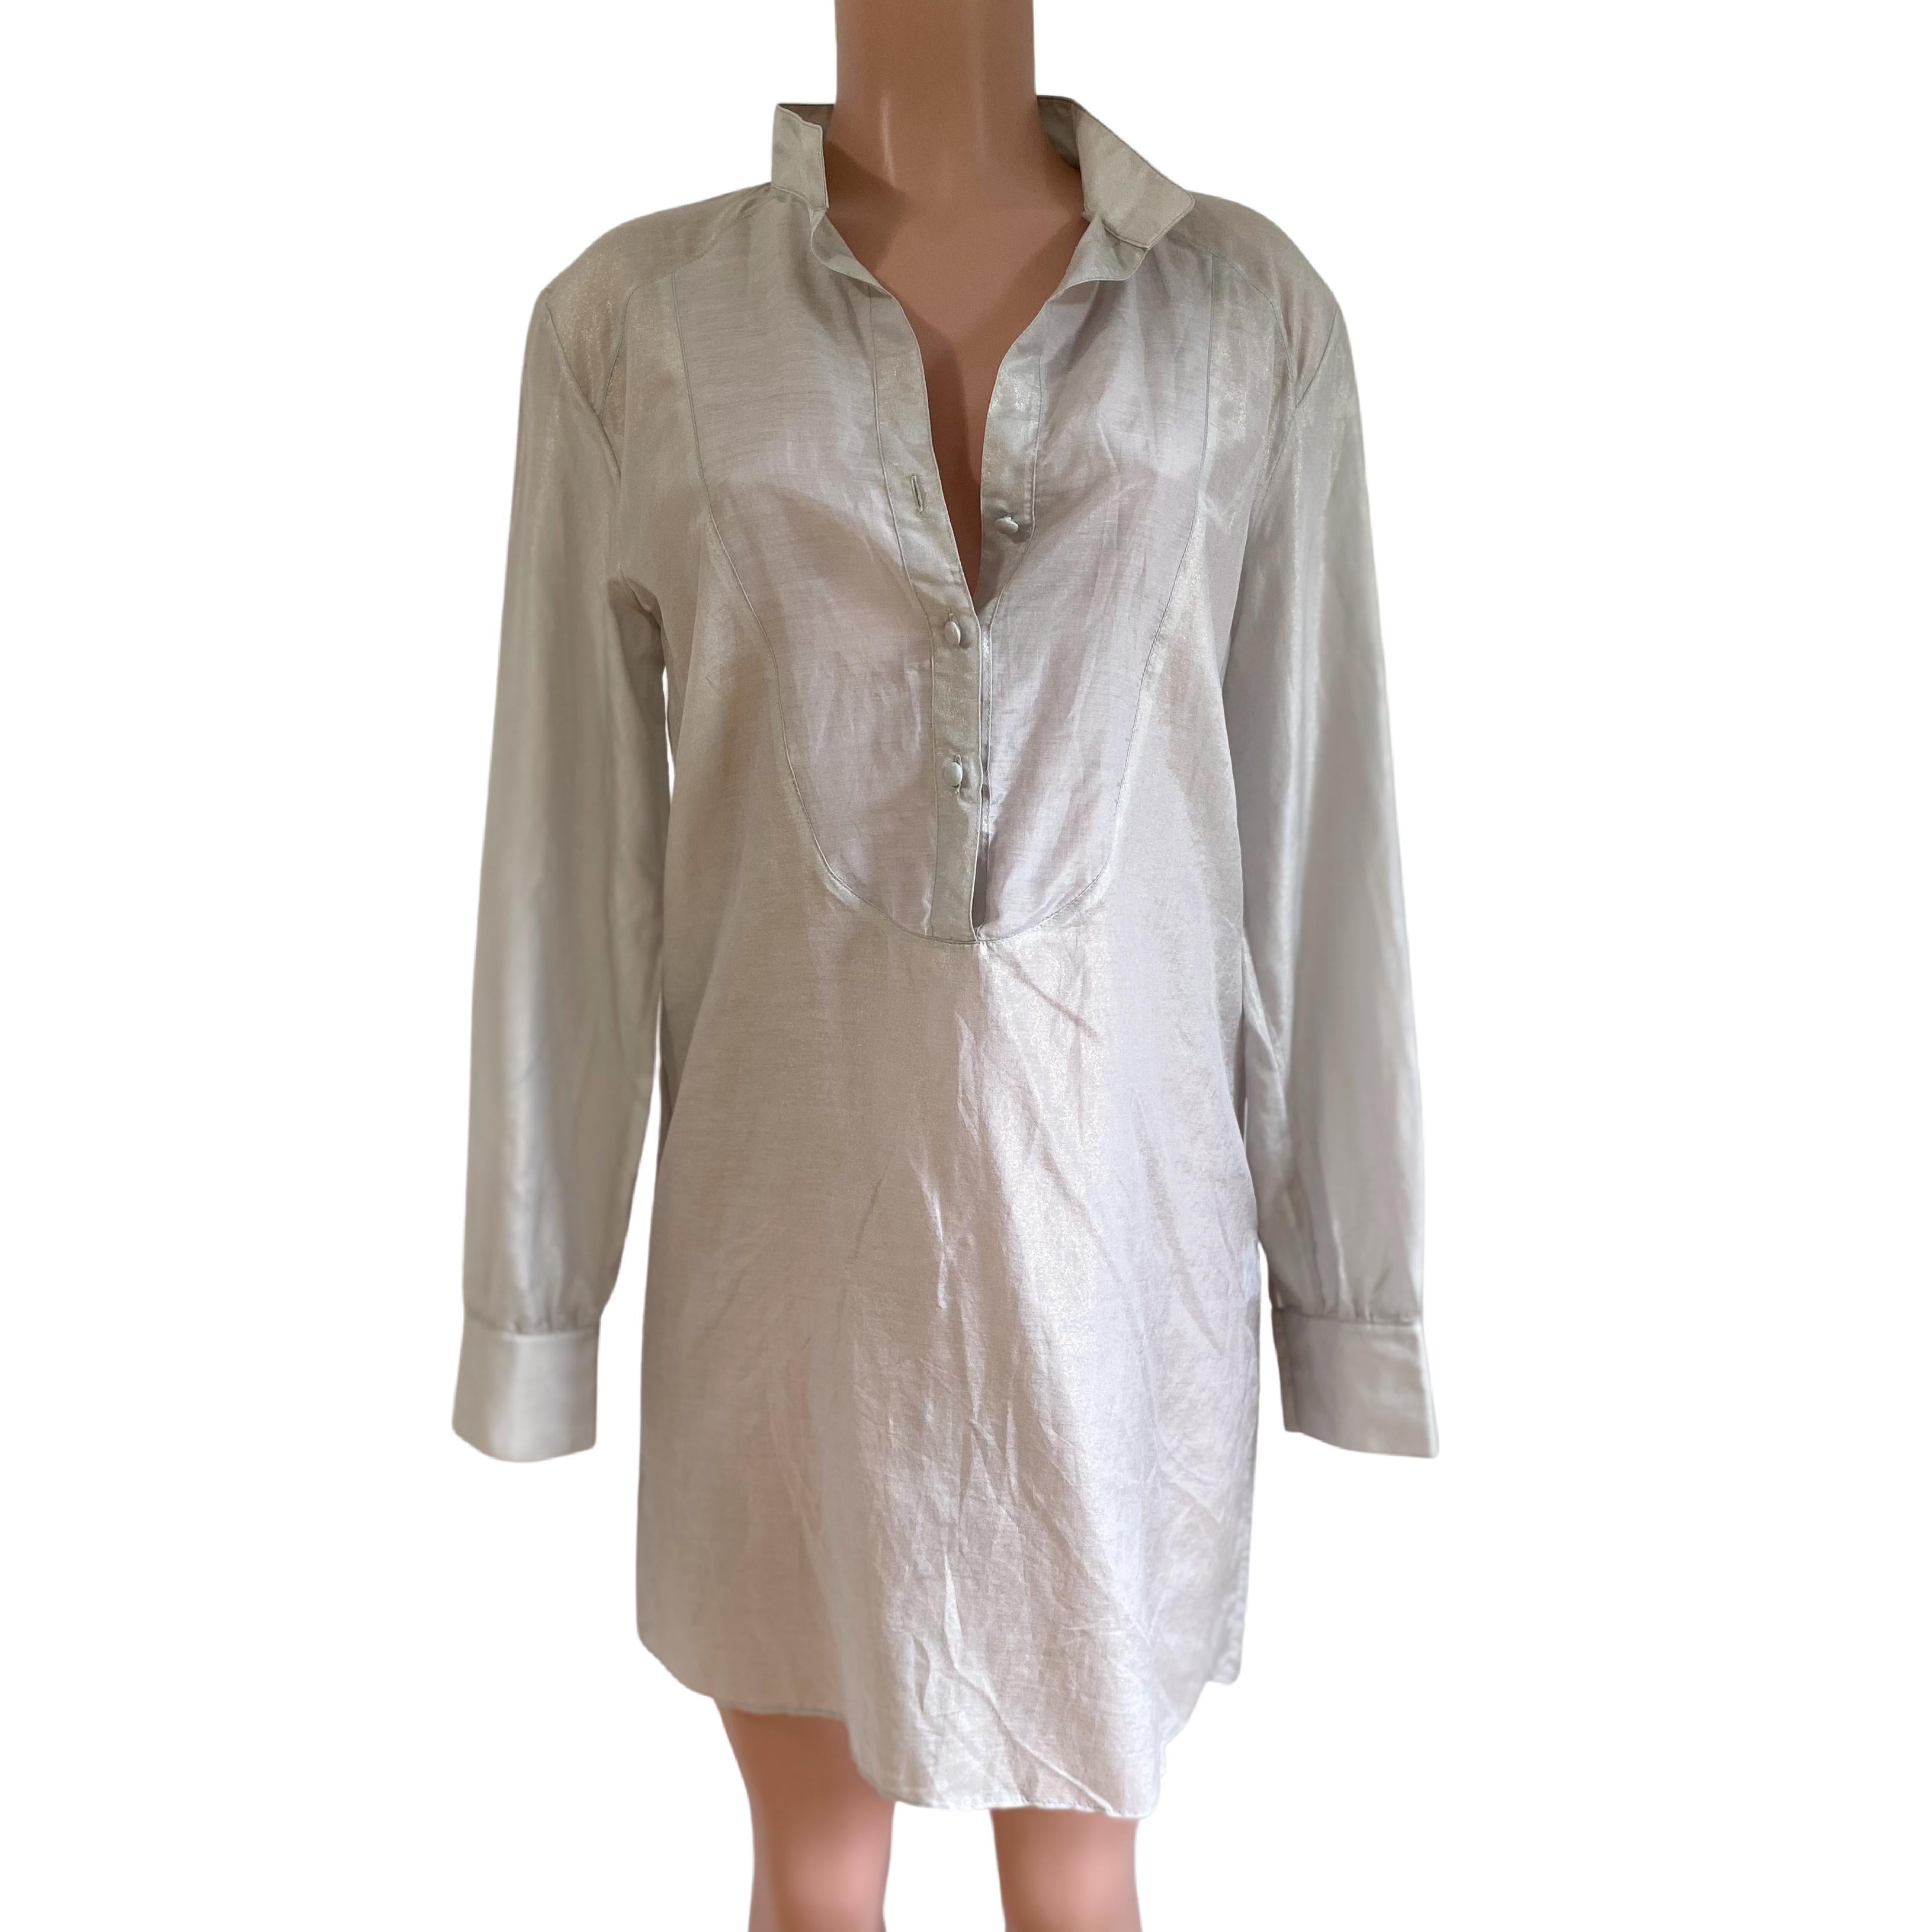 Authentic Flora Kung 

Condition: Brand New With Tag
 
Material: FLORA KUNG exclusive fabric- goldwash over pale gray pure silk Gossamer

Grandfaather collar, strategically placed 3 buttons, and a belt in case you want to wear it belted.

US size 4